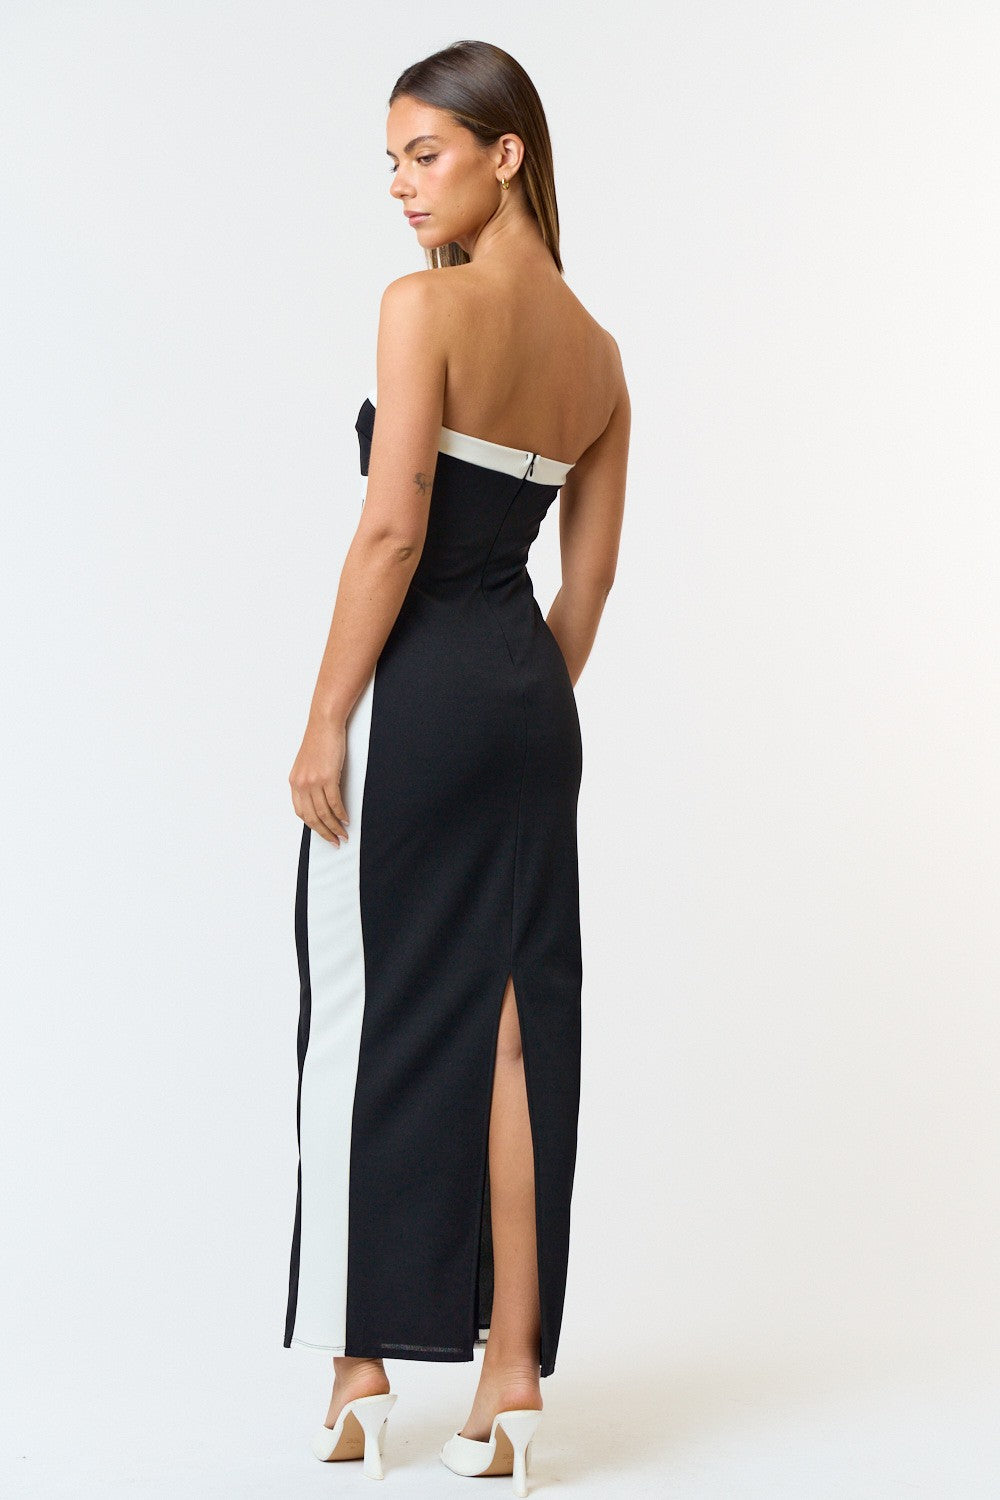 Women's Black and White Bold Contrast Tube Dress - Maxi Dress With slit in back